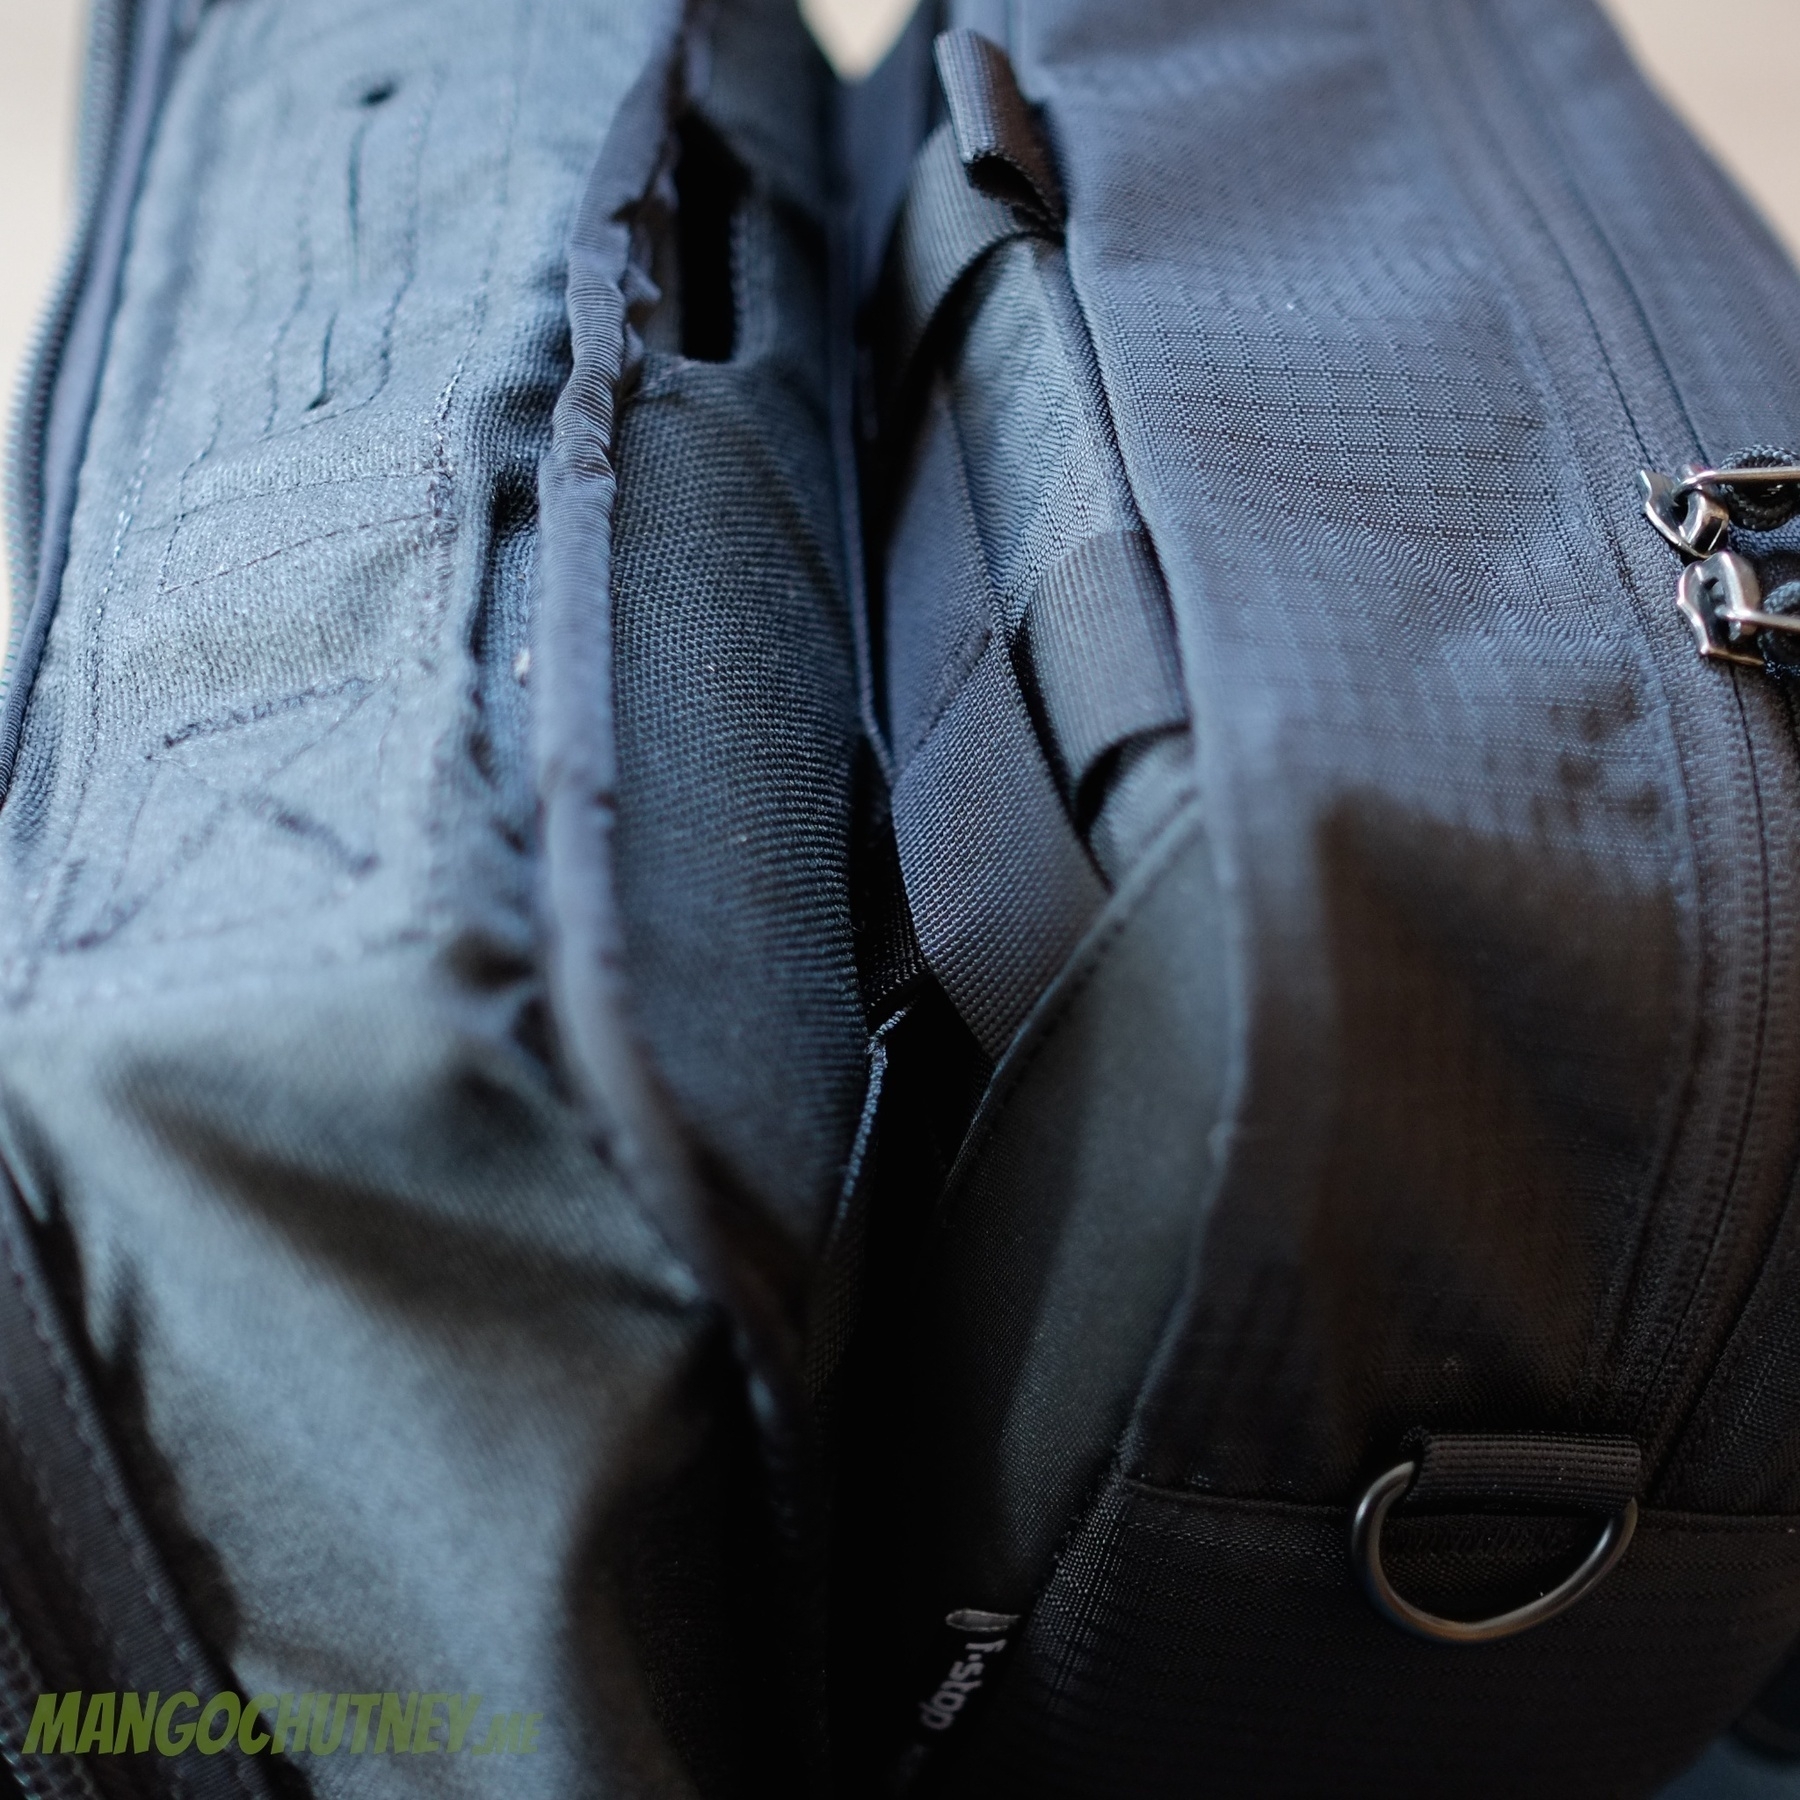 Attaching the f-stop Harney Pouch in the Goruck GR0 3